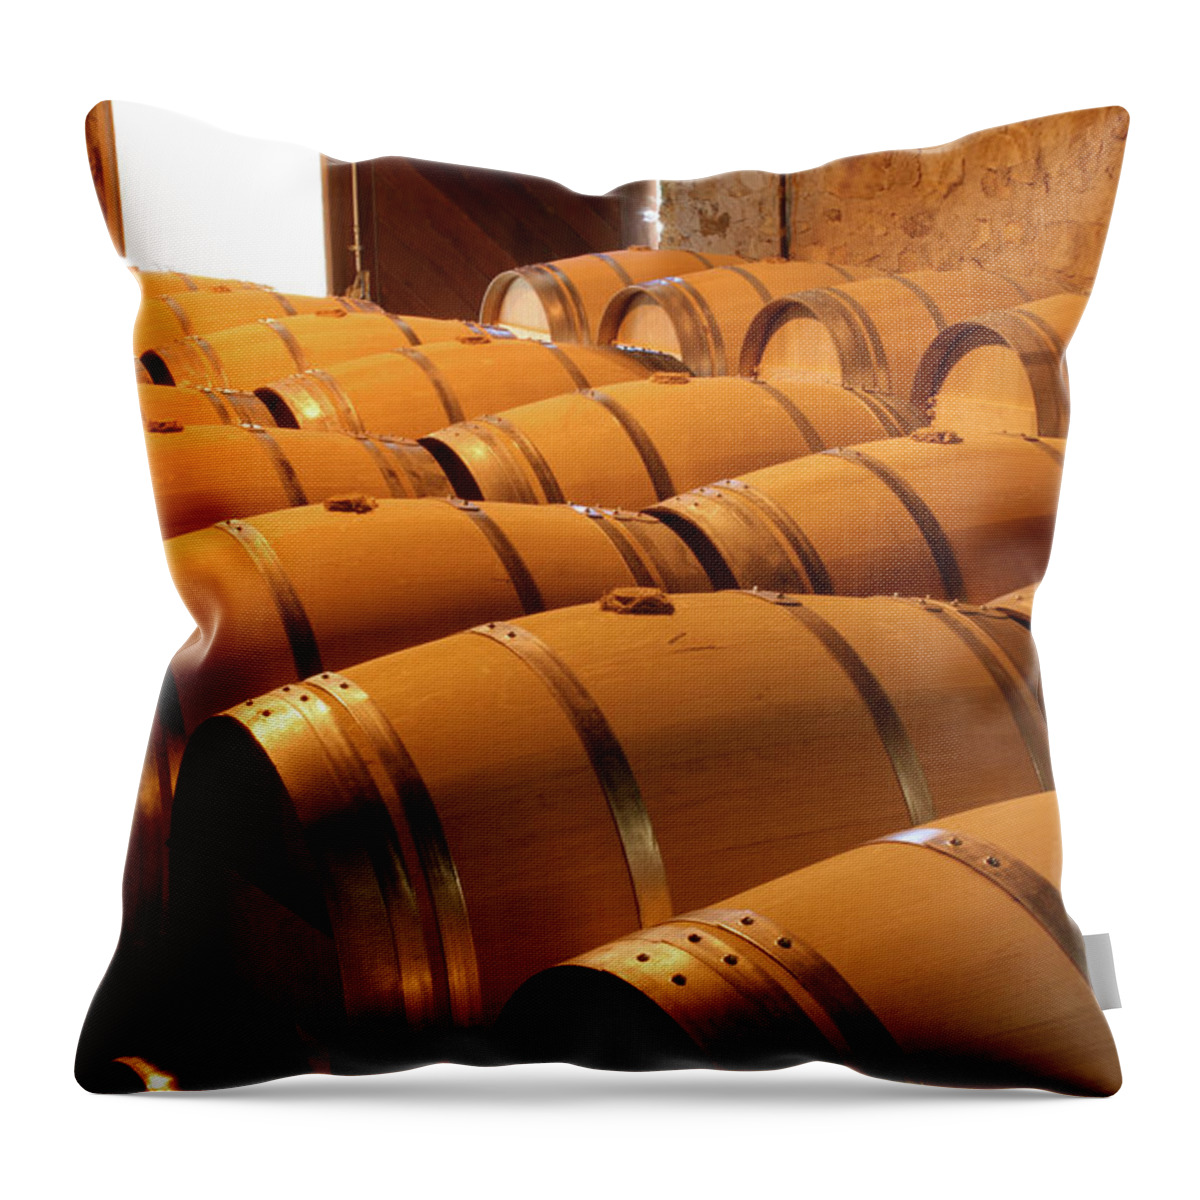 Fermenting Throw Pillow featuring the photograph Oak Wine Barrel Rows In Winery Cellar by Yinyang